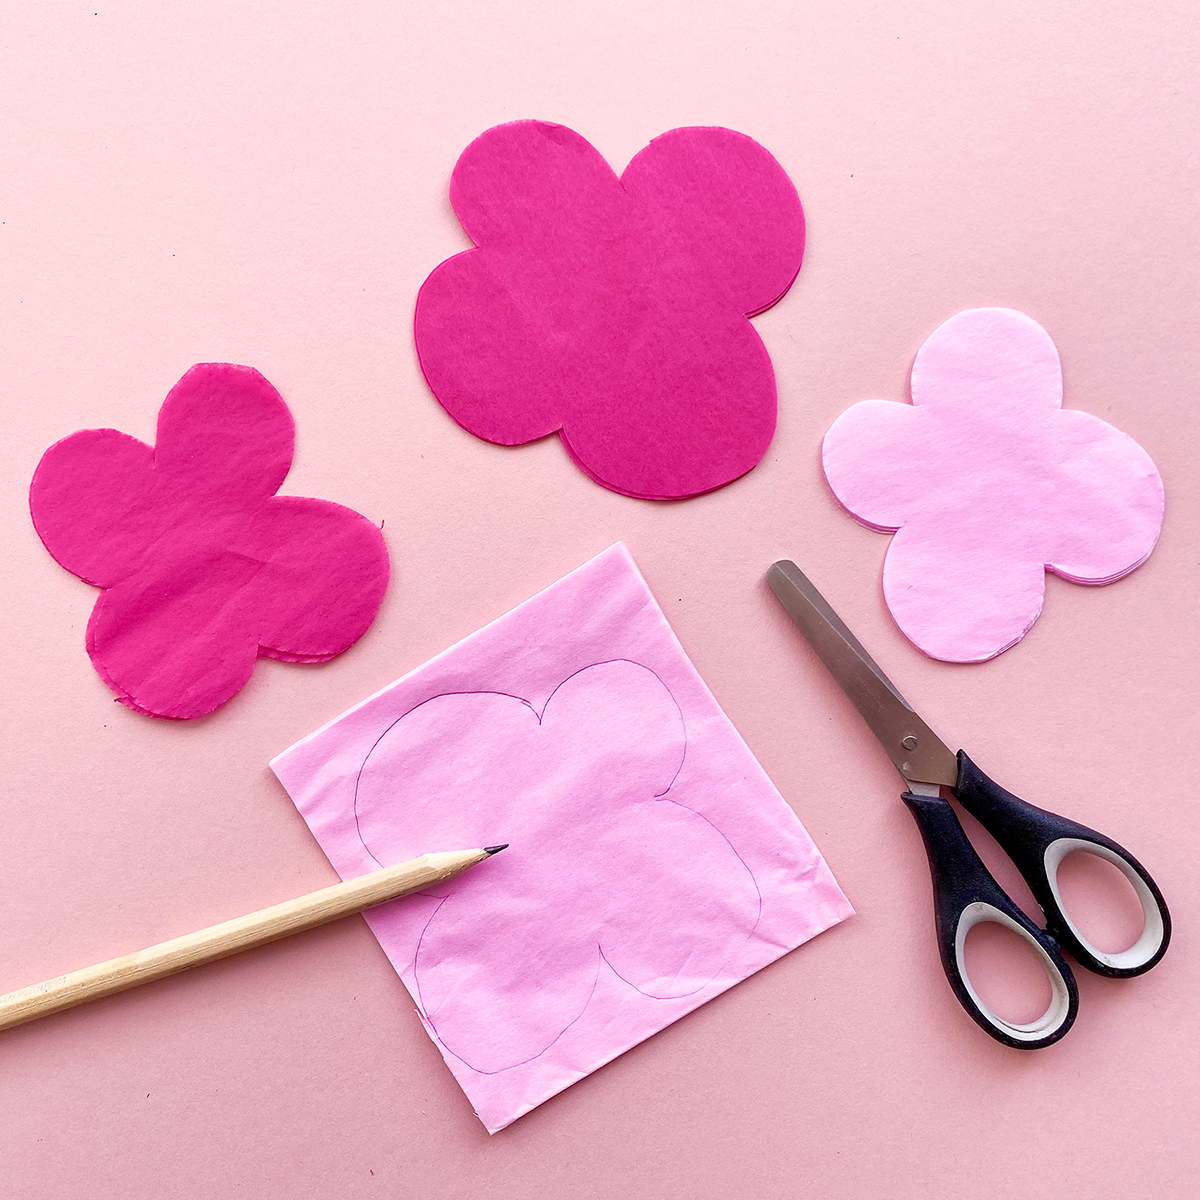 Photo of pink tissue paper with a simple flower design drawn on in pencil alongside some scissors, ready to cut out